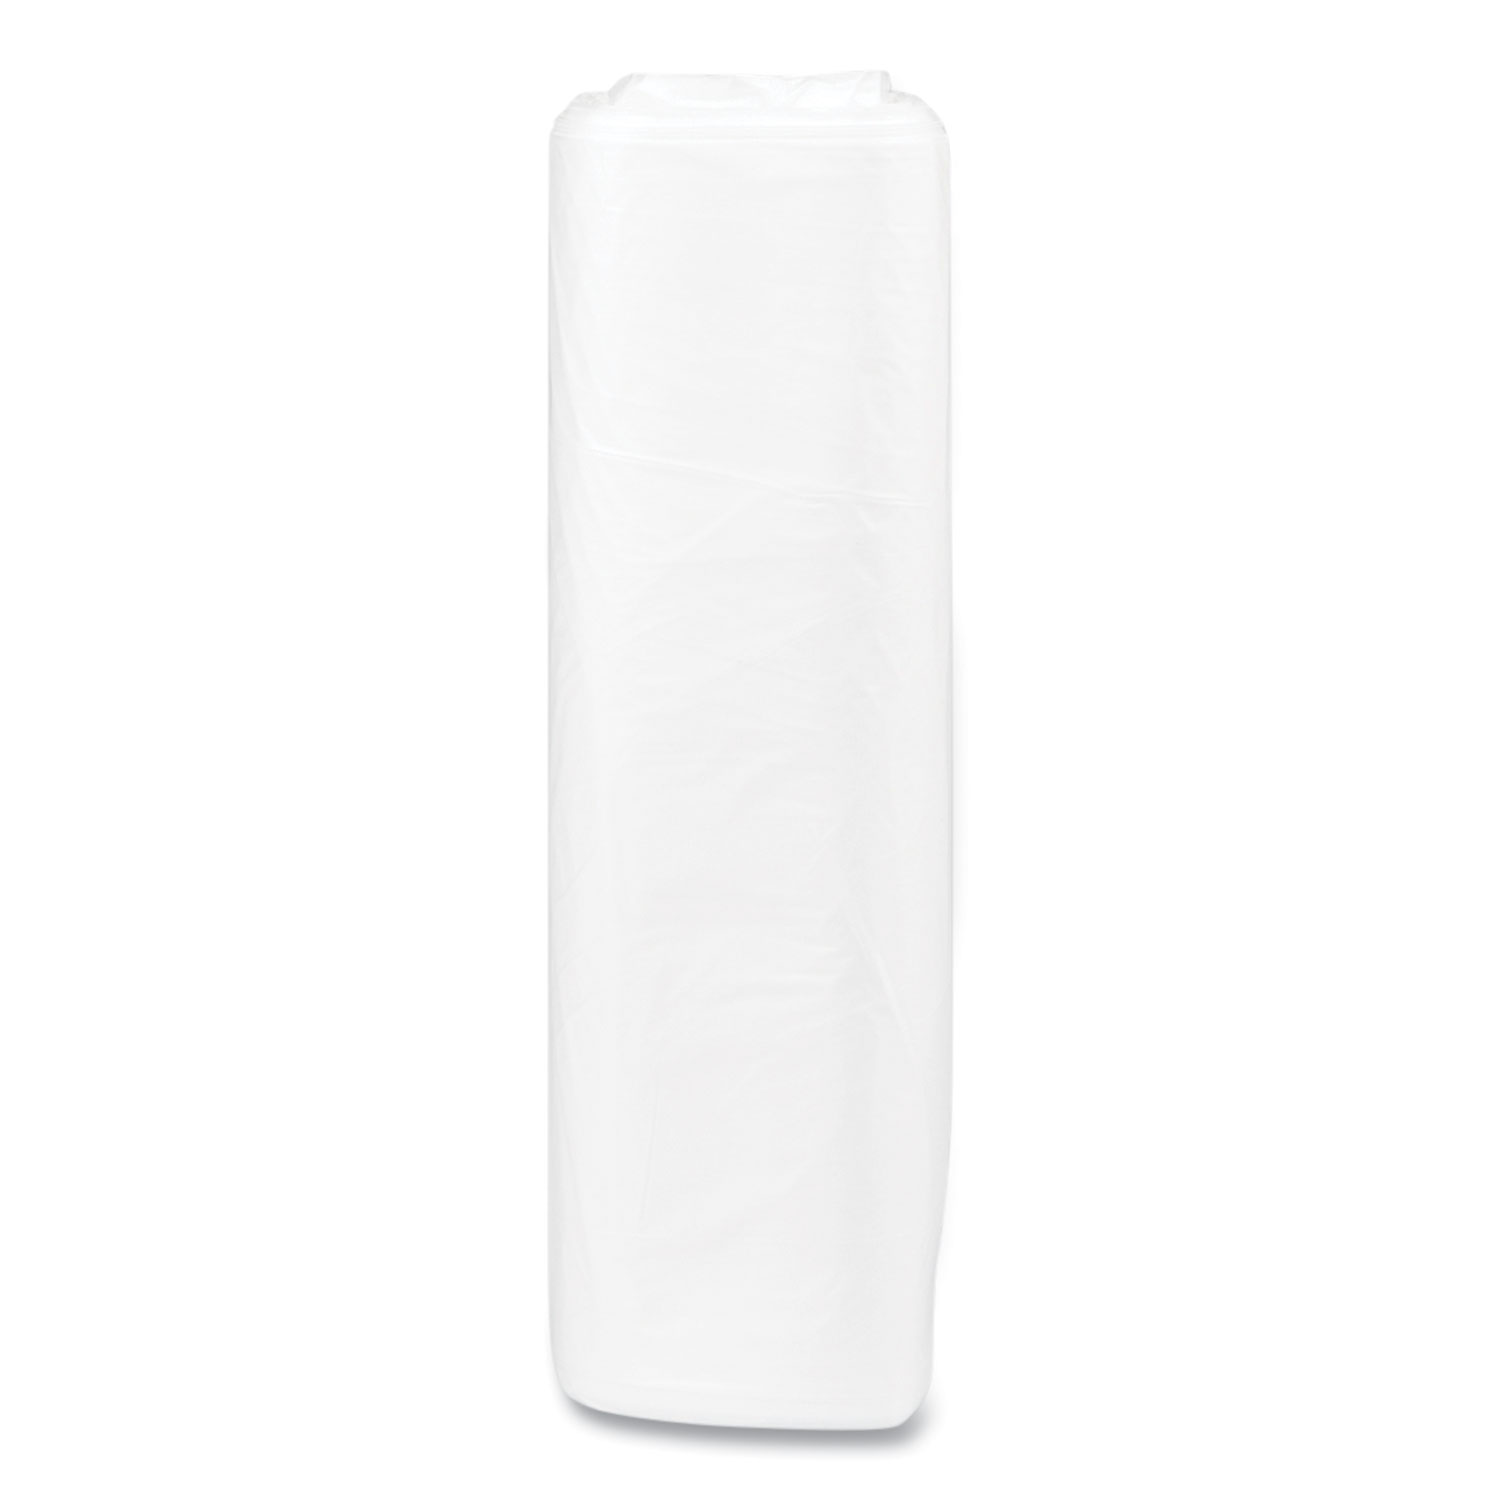 Wholesale NICO® Rhodoid Rolls for Lining Cakes 3-6-10cm for your store